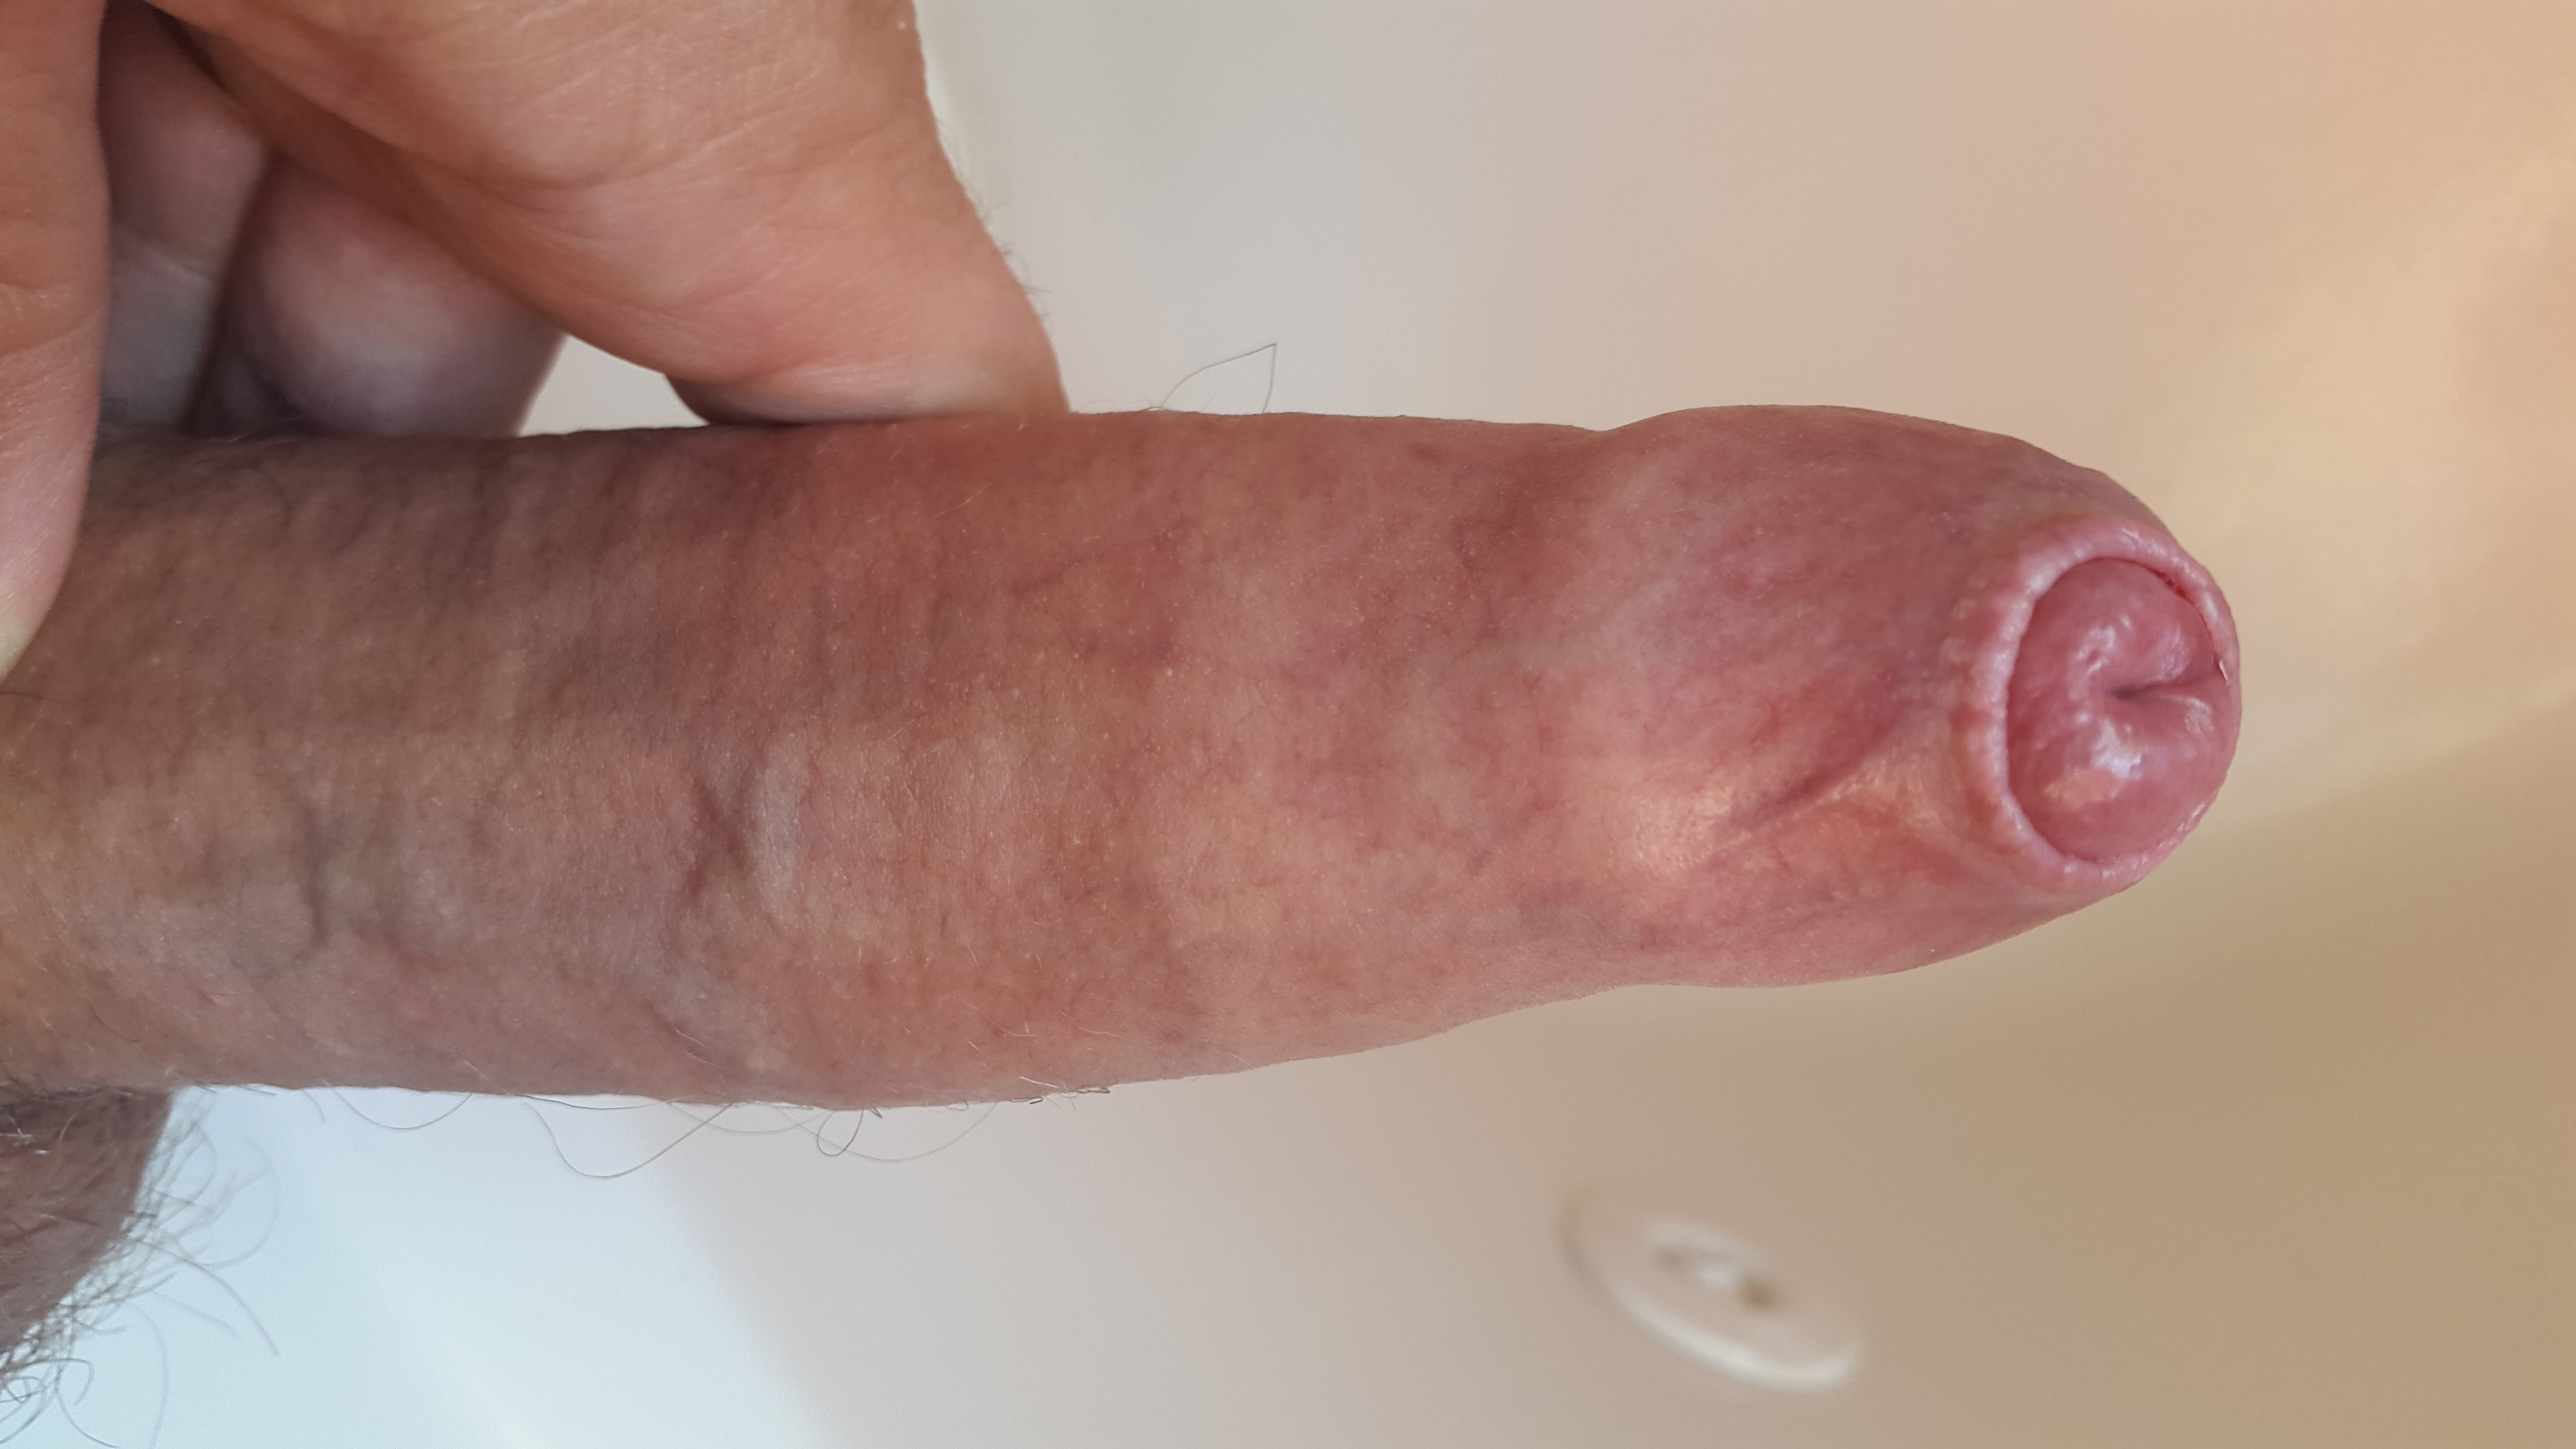 Penis with phimosis